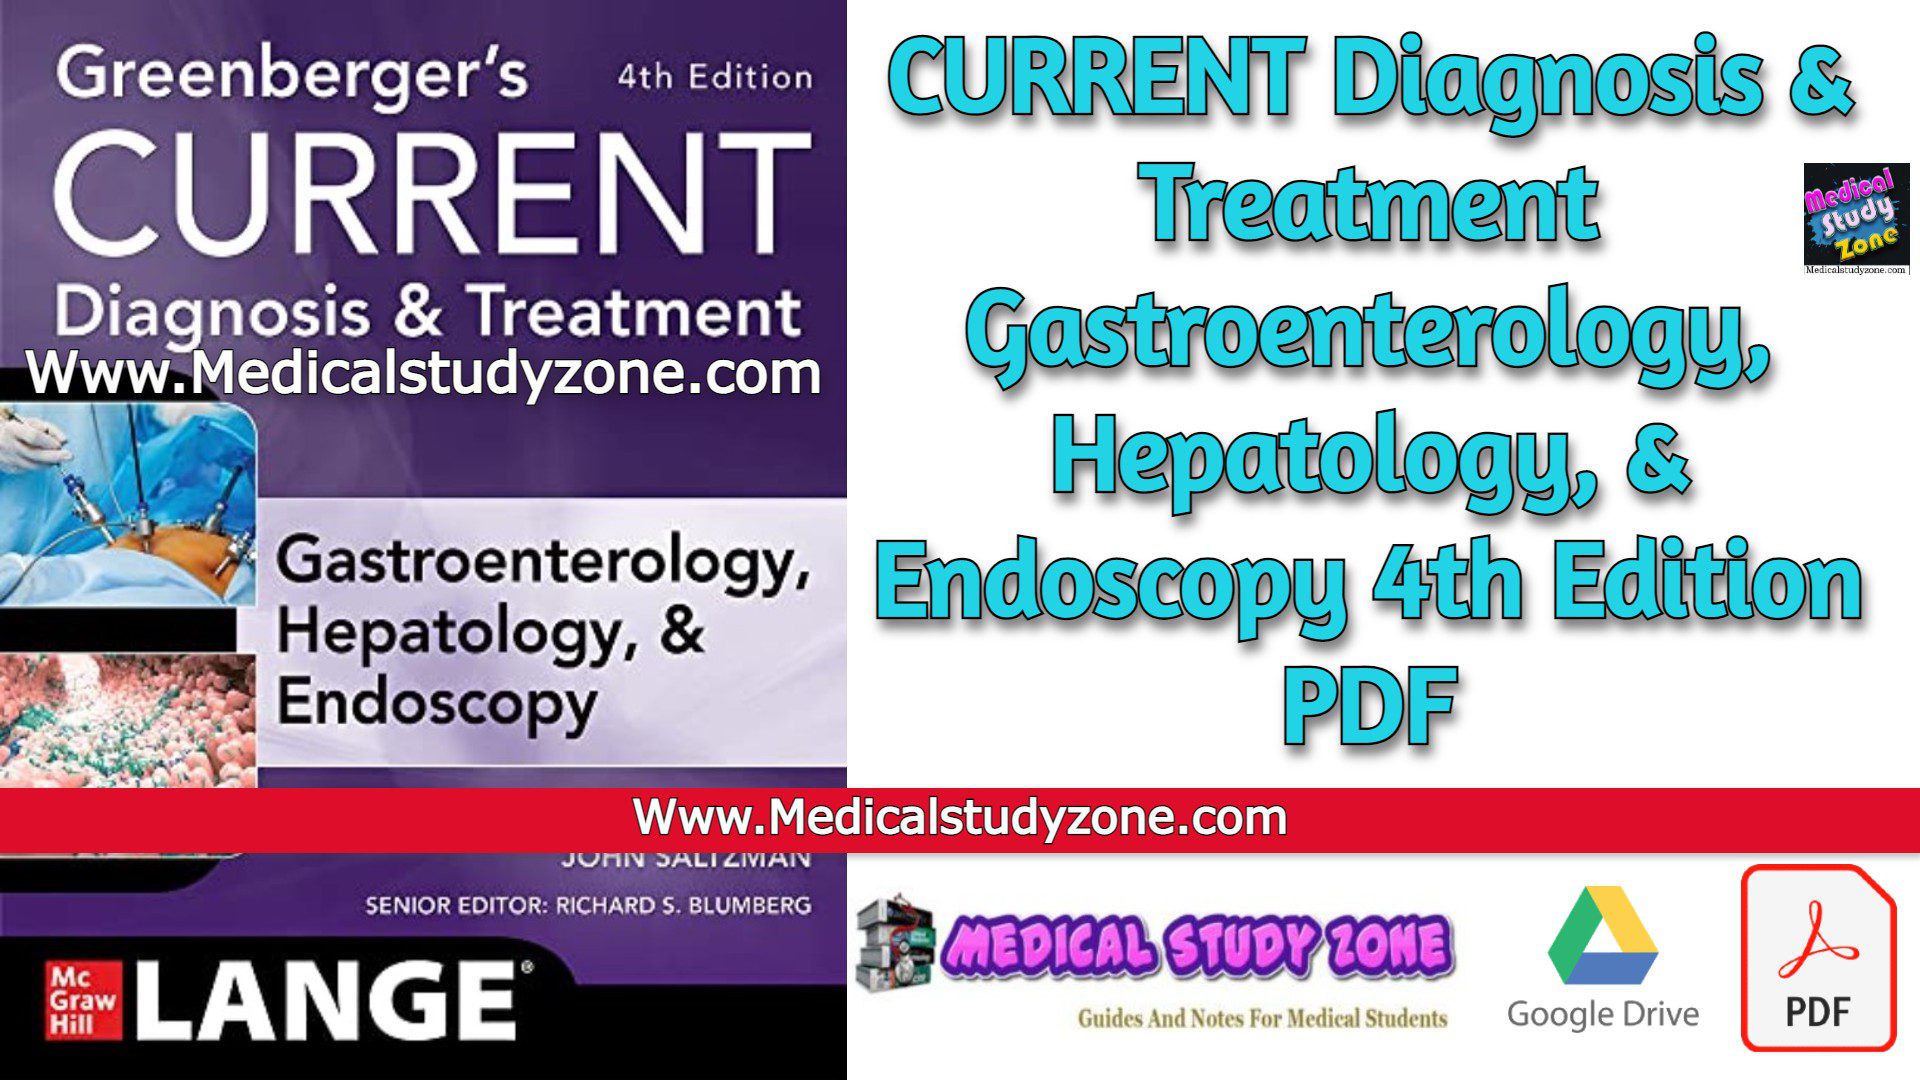 Download CURRENT Diagnosis & Treatment Gastroenterology, Hepatology, & Endoscopy 4th Edition PDF Free